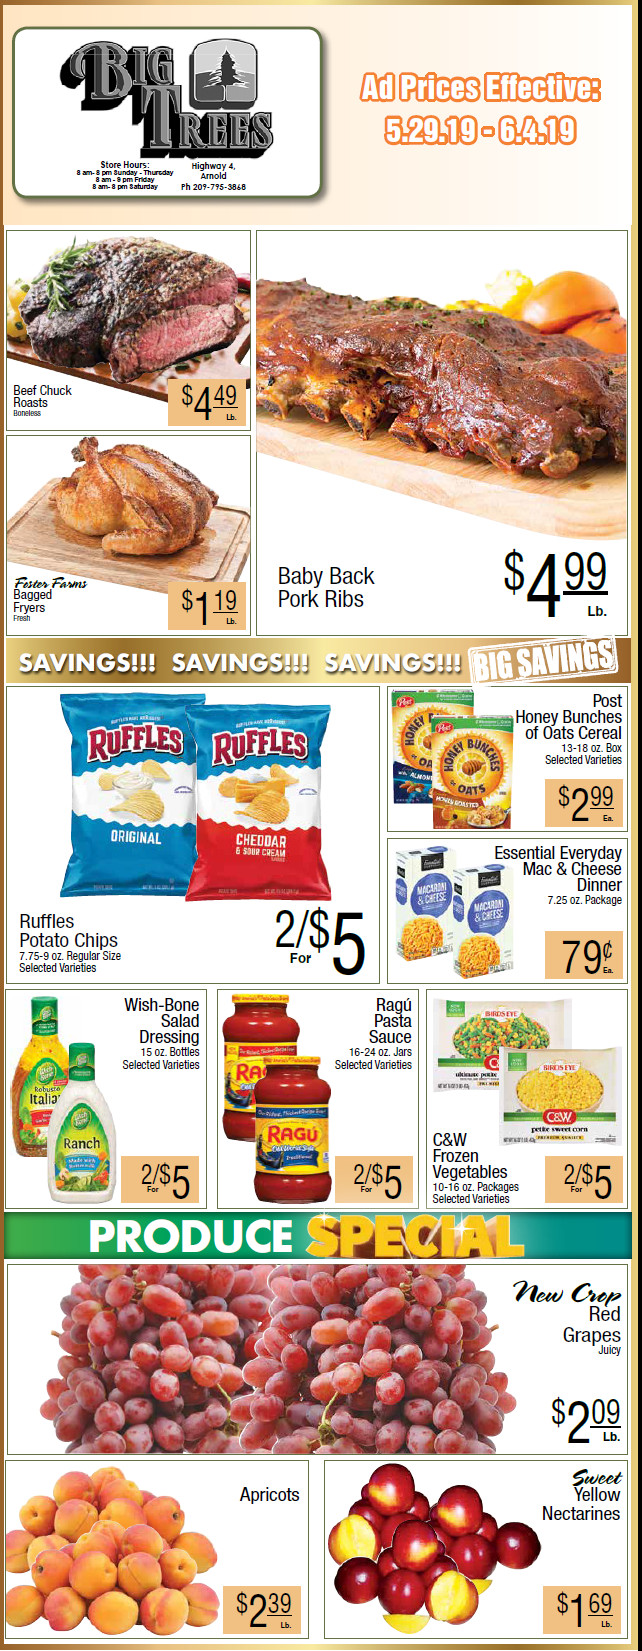 Big Trees Market Weekly Ad & Grocery Specials Through June 4th